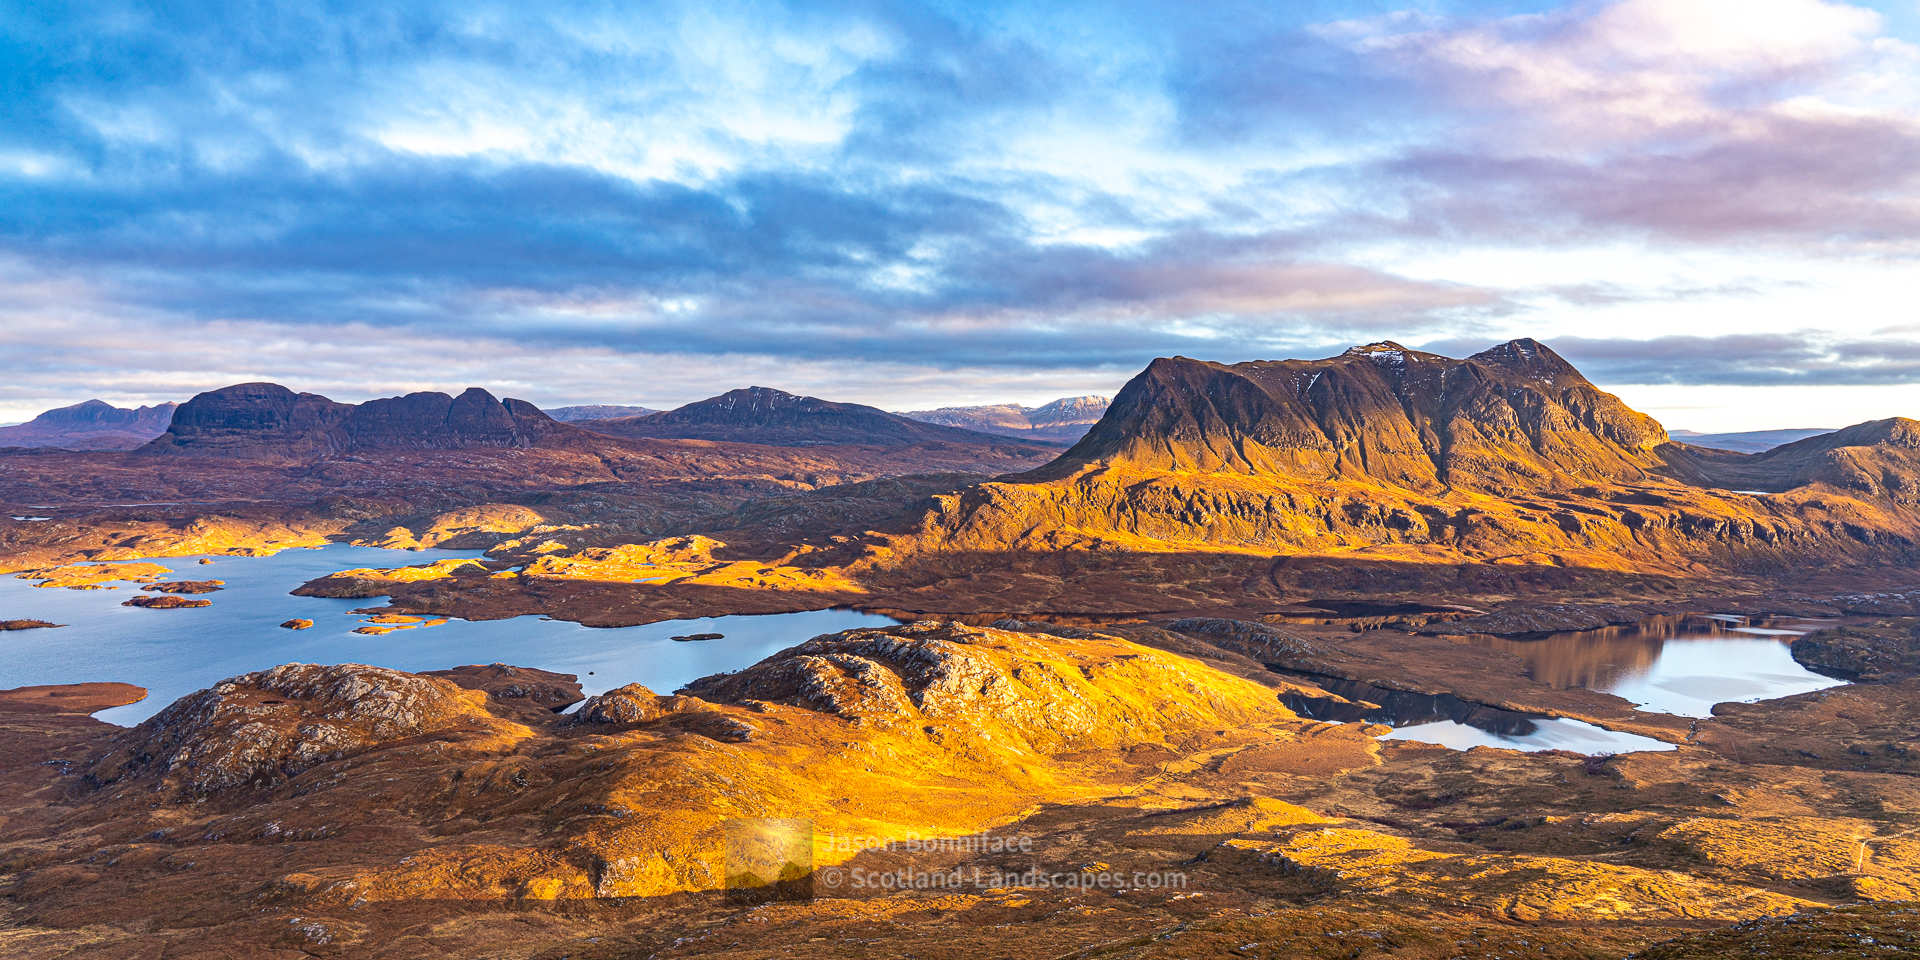 Suilven, Canisp, Cul Mor from Stac Pollaidh, Assynt & Ullapool